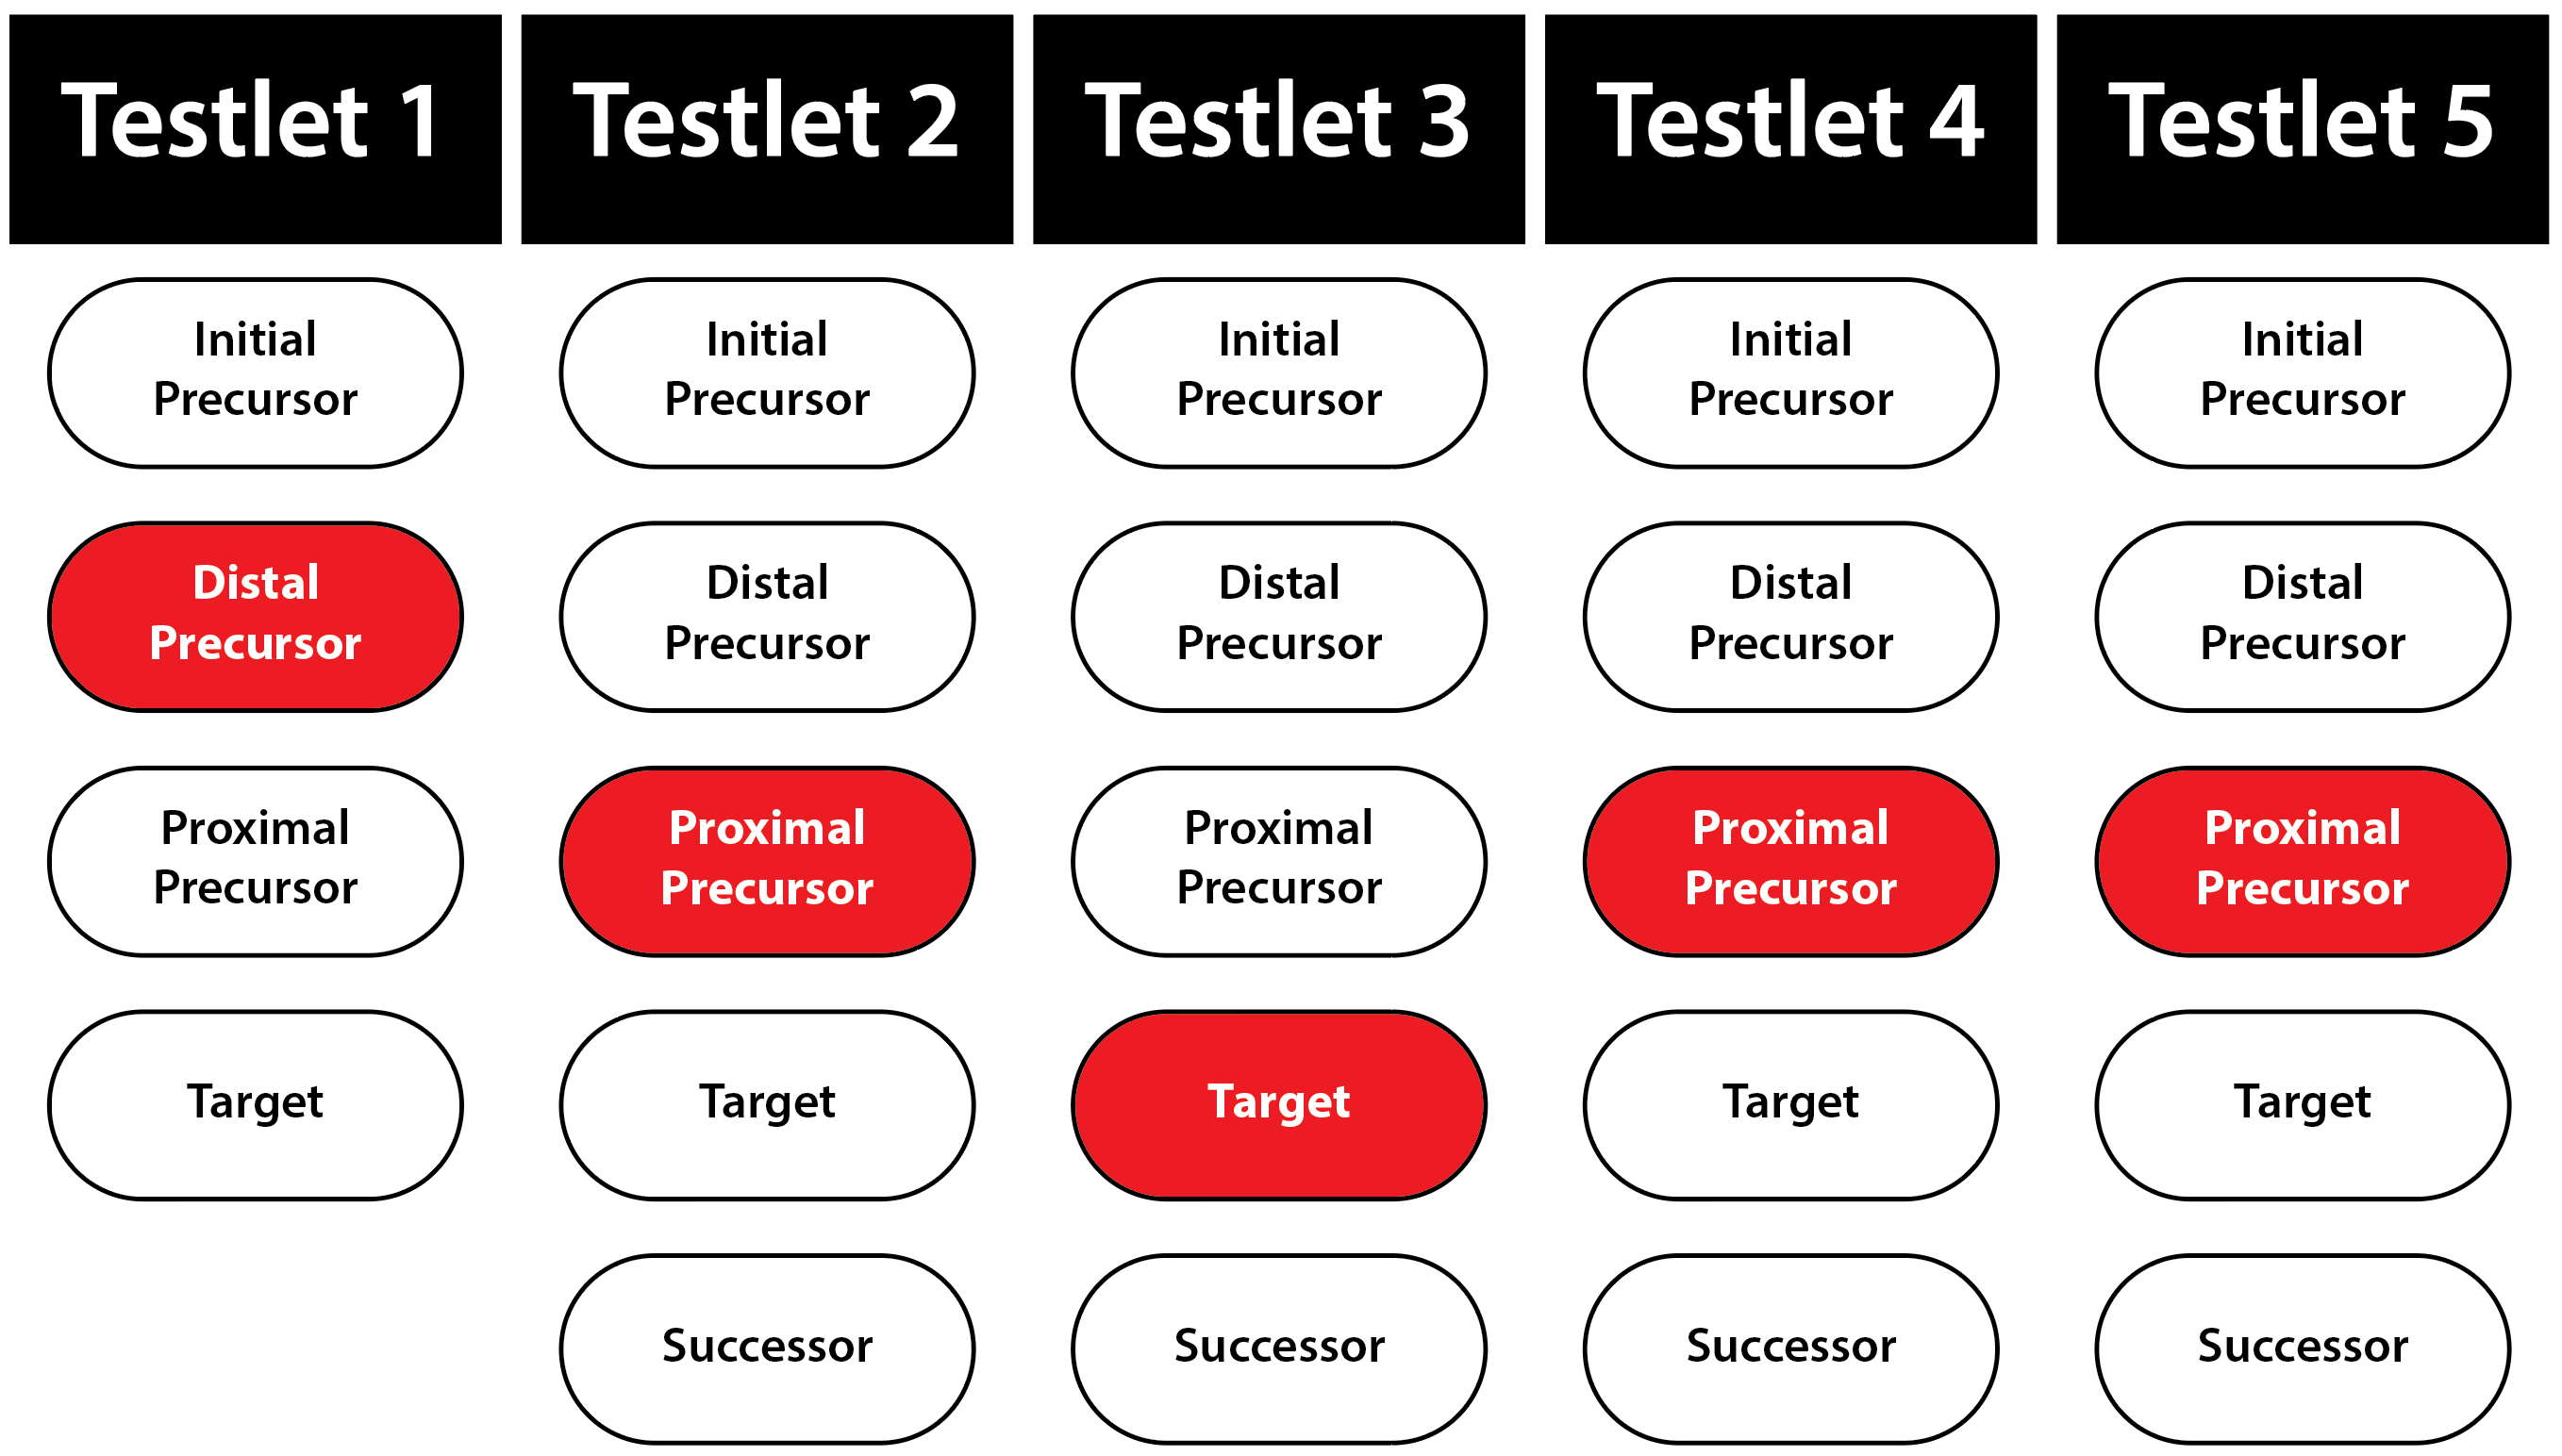 A flowchart showing a student taking their first testlet at the Distal Precursor level, then routing to the Proximal Precursor, Target, Proximal Precursor, and Proximal Precursor on testlets 2 through 5, respectively.